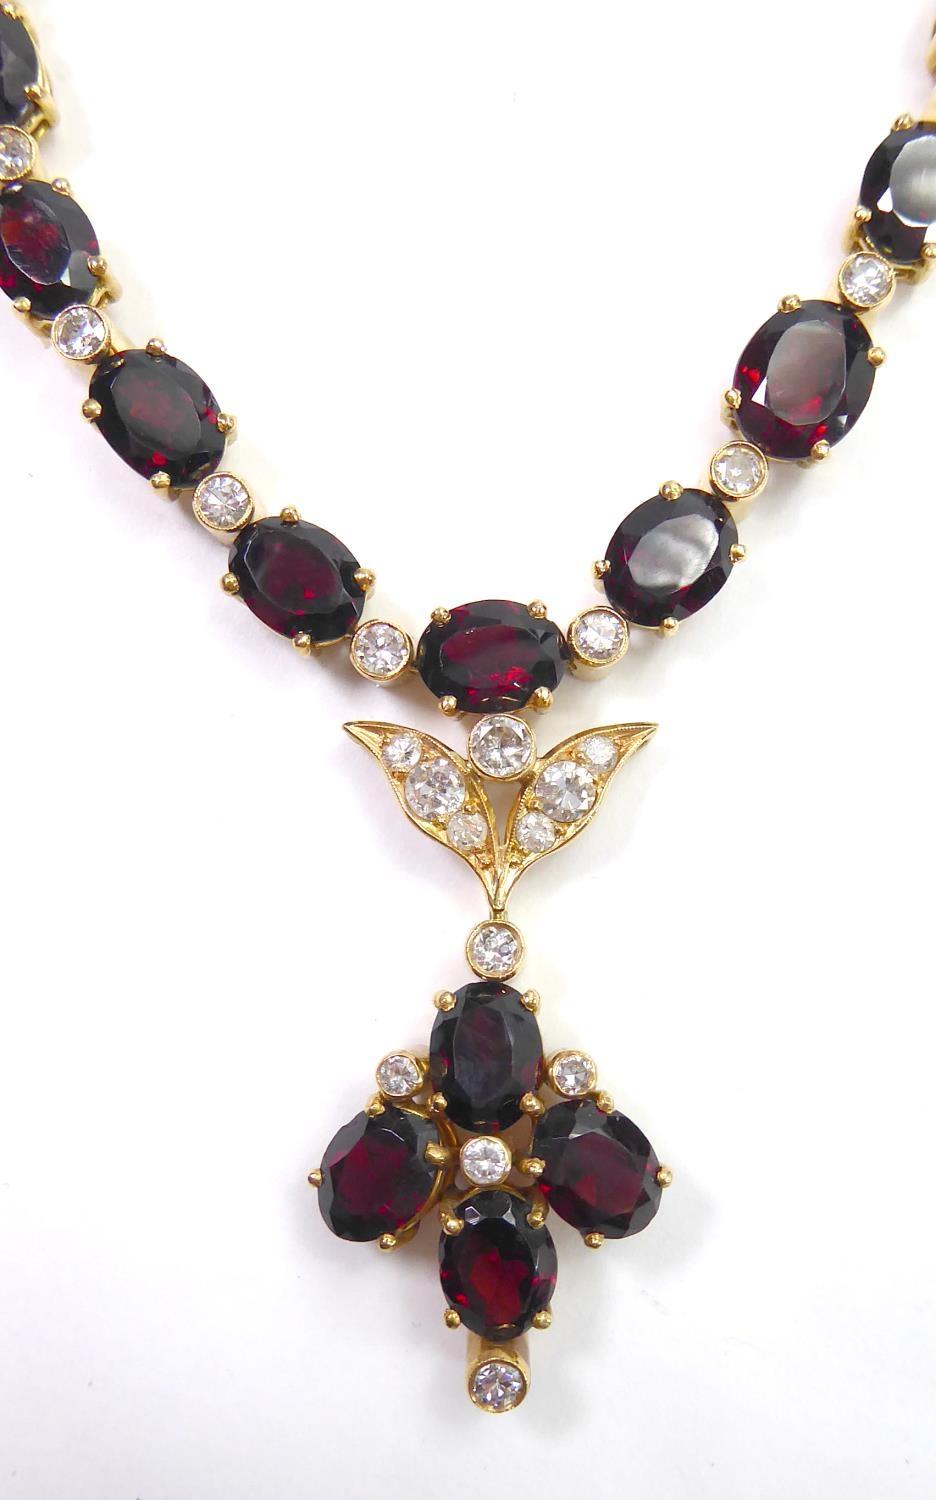 A GARNET AND DIAMOND ENCRUSTED NECKLACE AND MATCHING EARRINGS. (61.6g) - Image 18 of 23